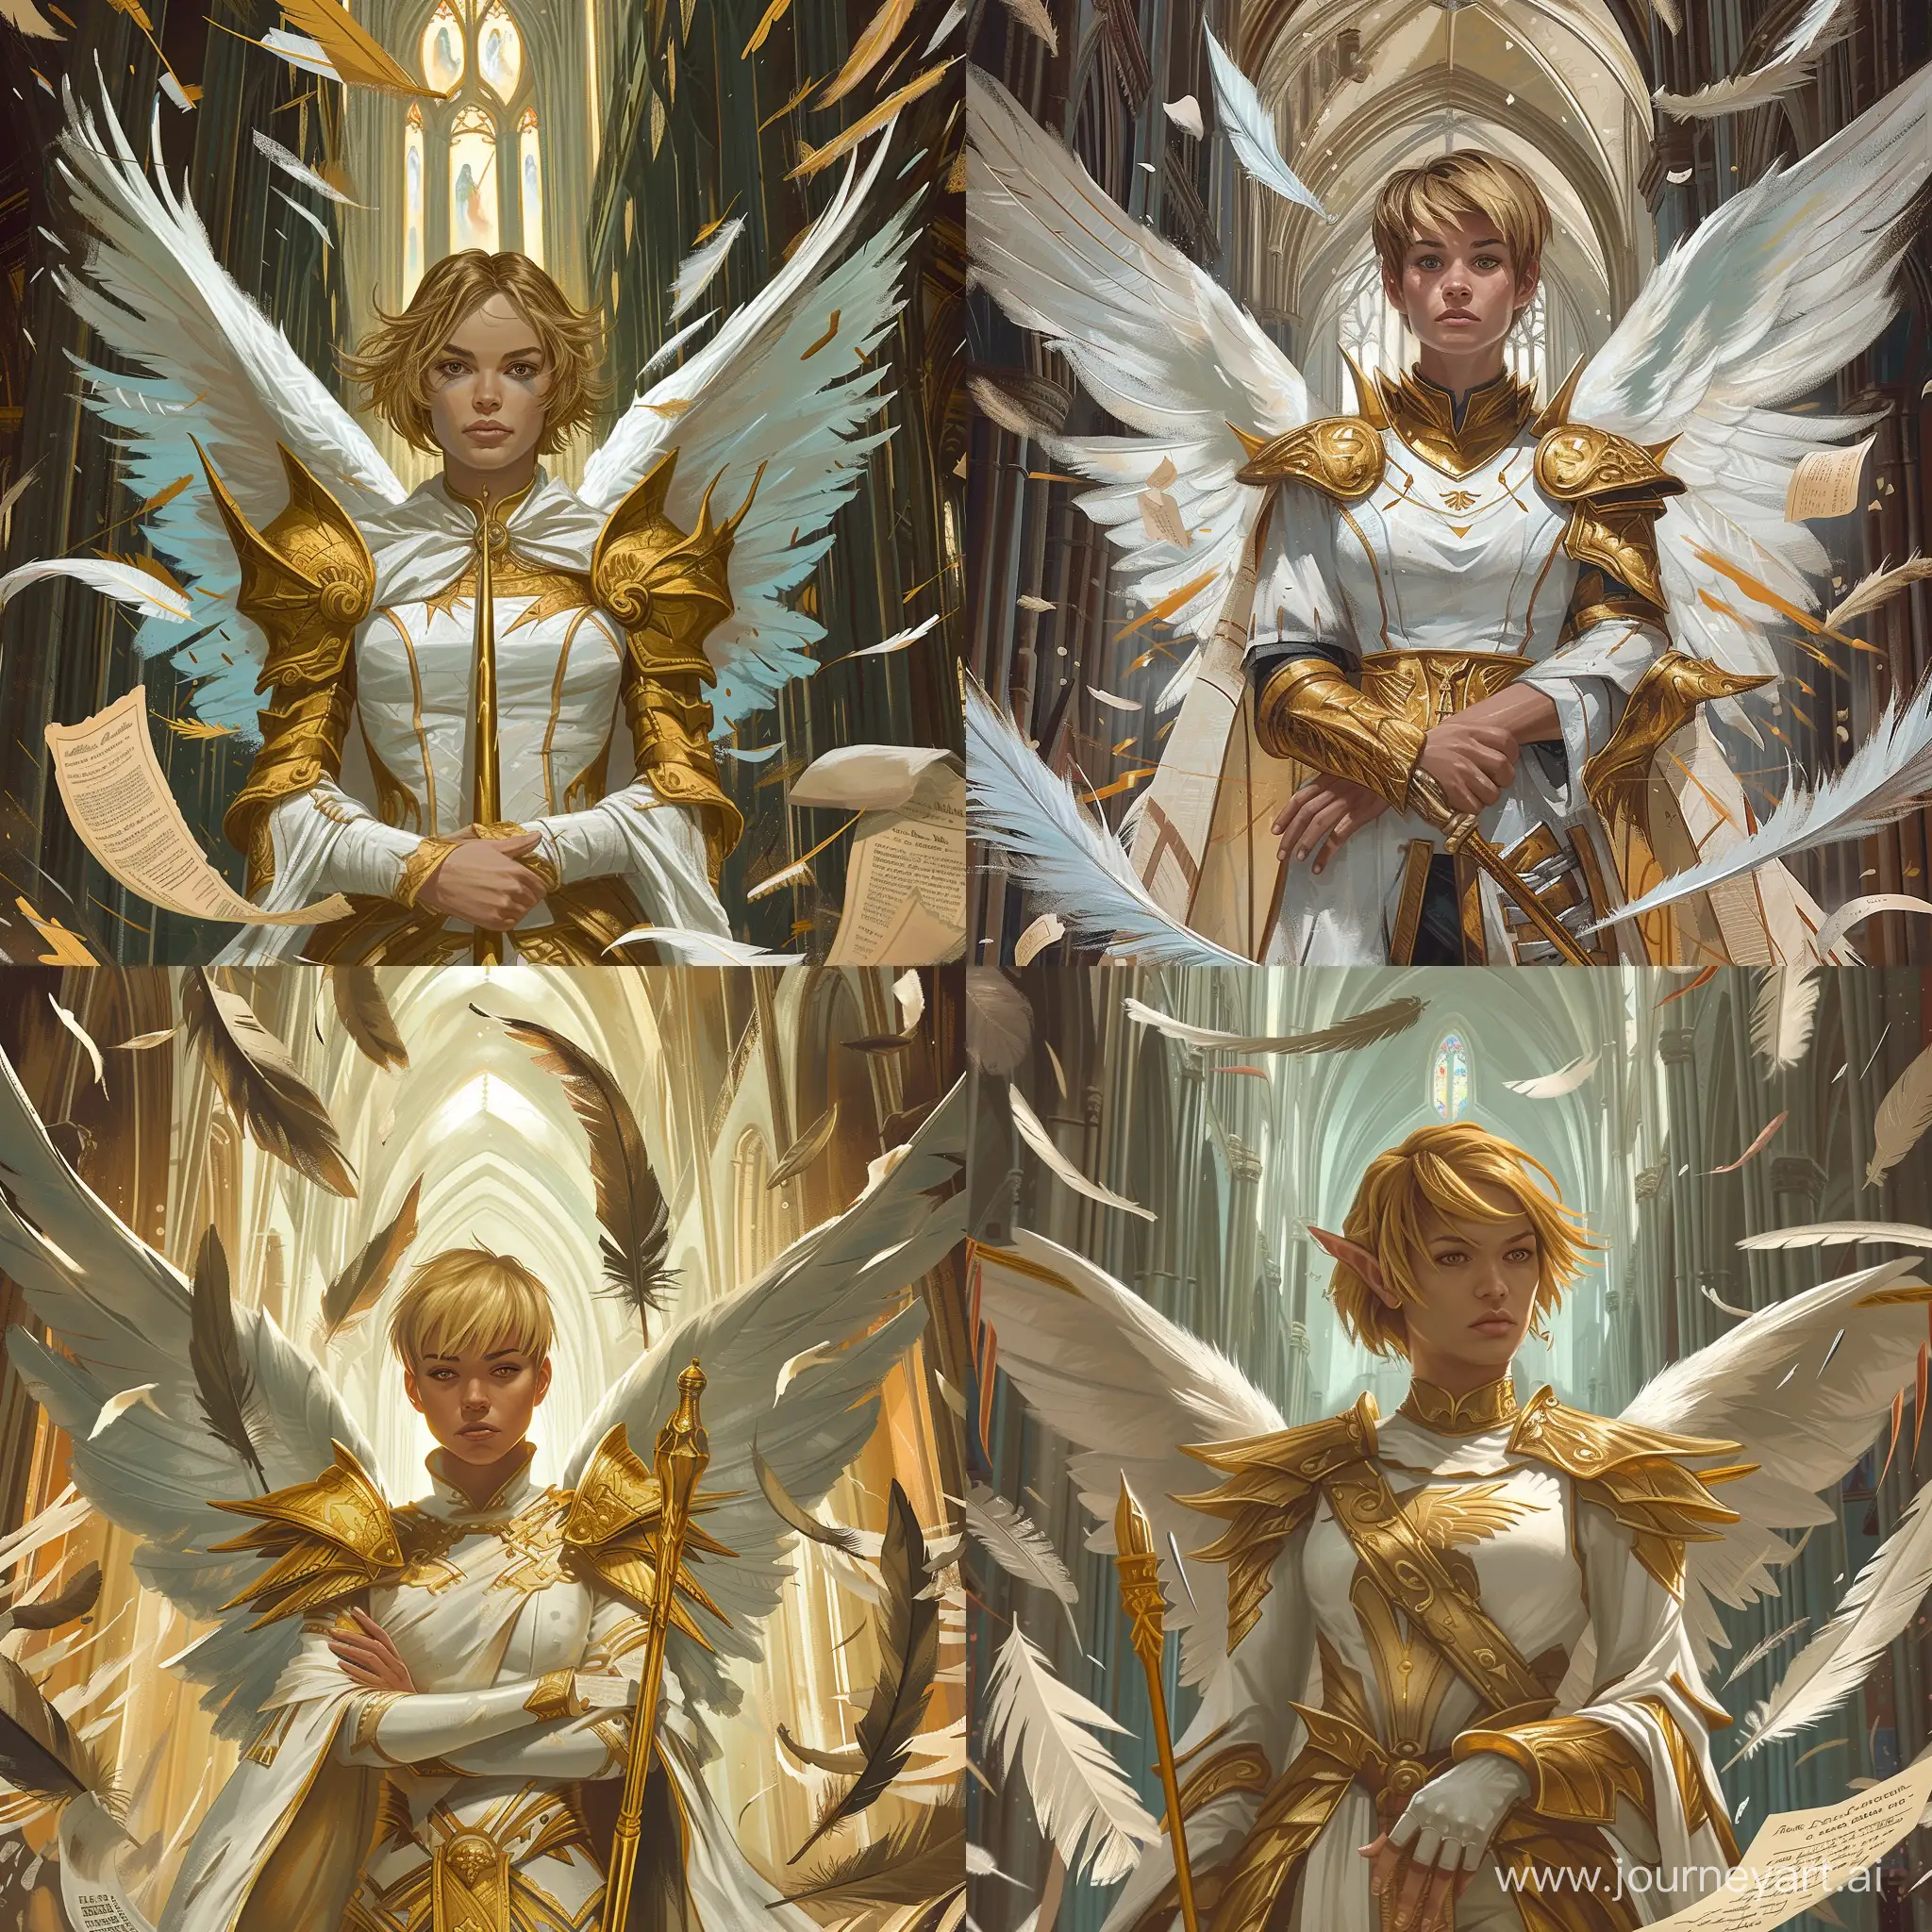 comic style illustration, painterly, heavy brush strokes, highly detailed, a female angel with wings folded by her side so they're visible at the bottom, wearing white and gold robes with gold armor, short blonde hair, eyes open, holding a golden staff weapon, inside a cathedral, feathers and parchment swirling around the area